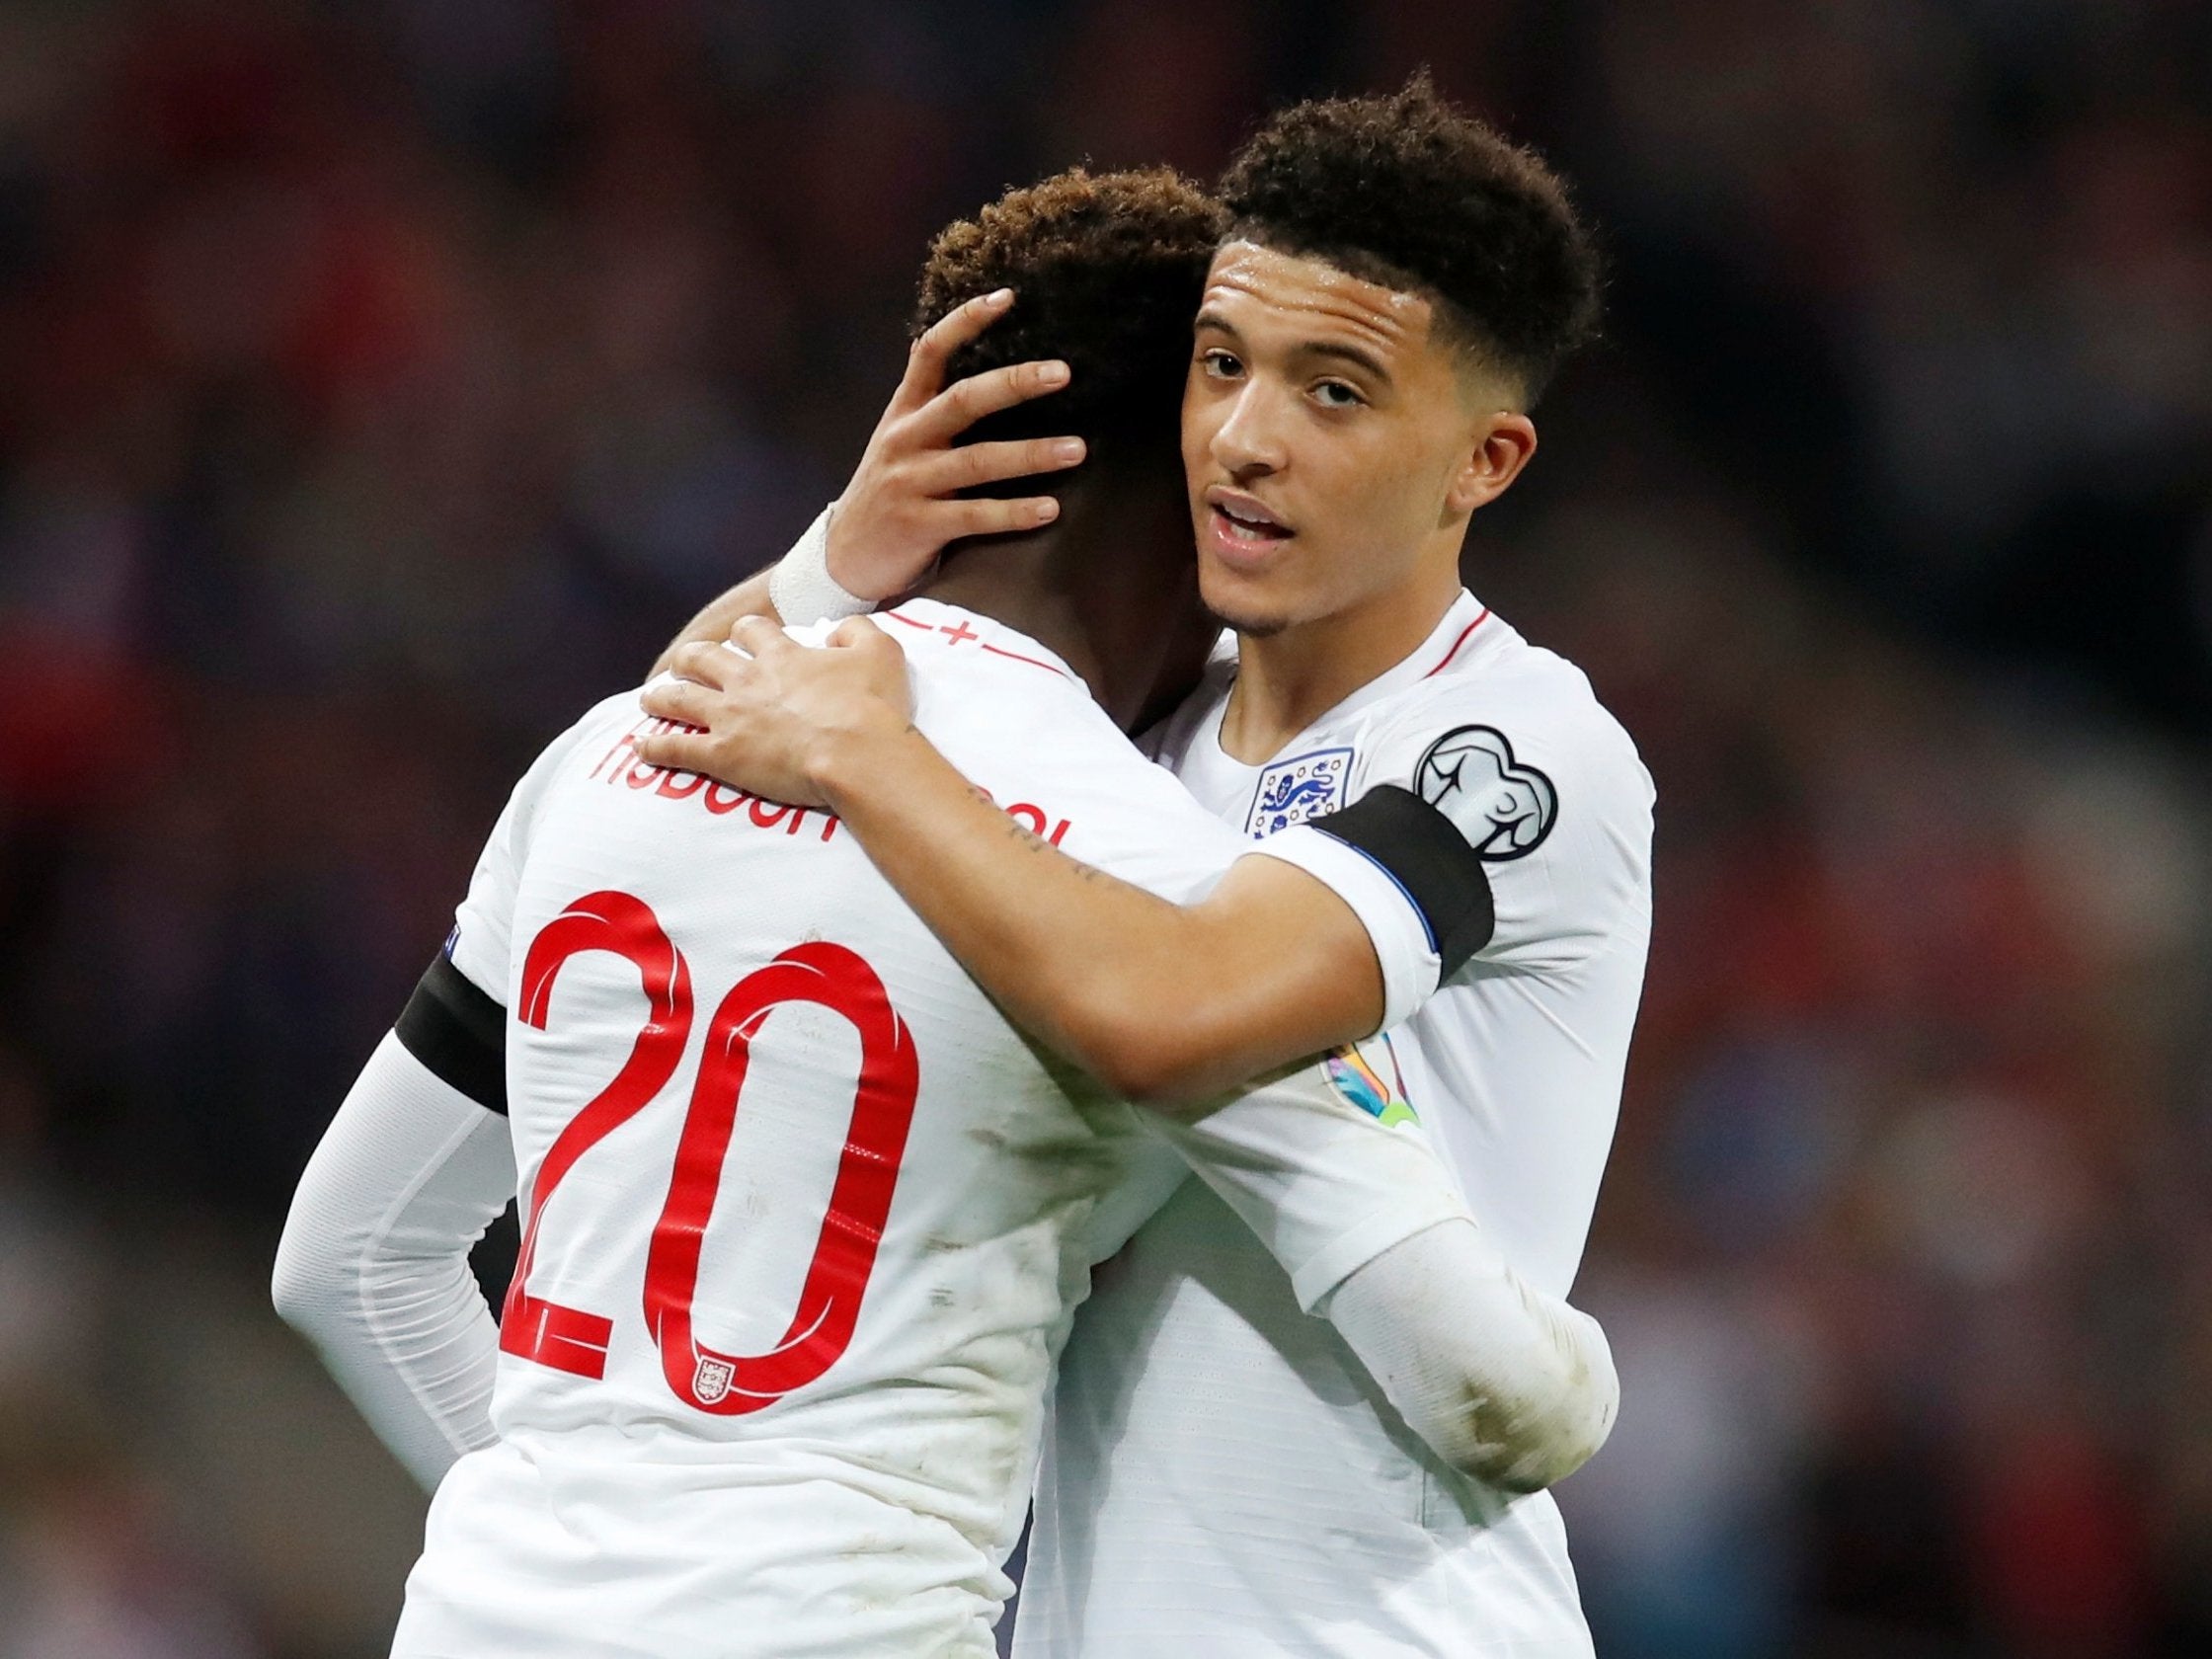 The young England teammates grew up playing football together in London